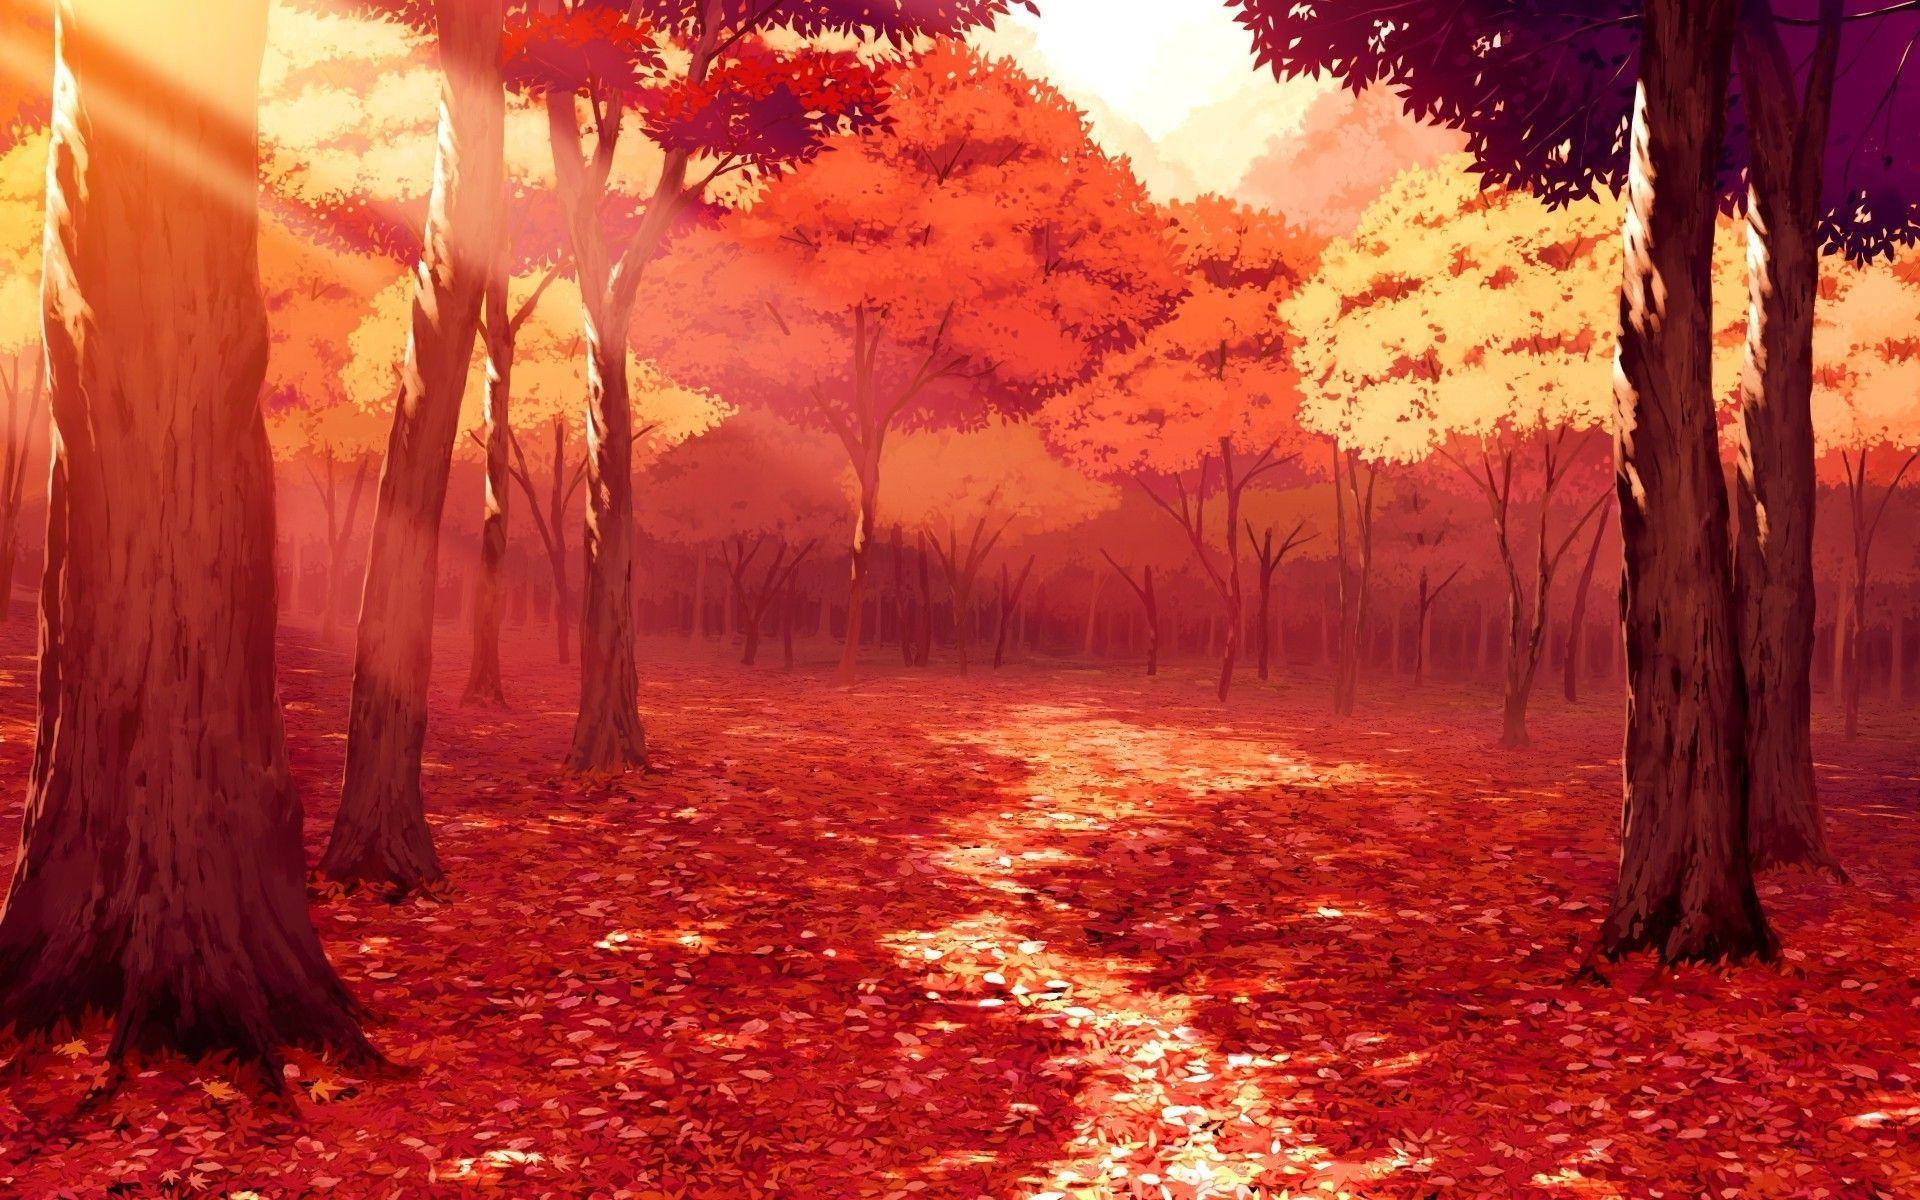 Anime Fall Wallpapers (59+ images)